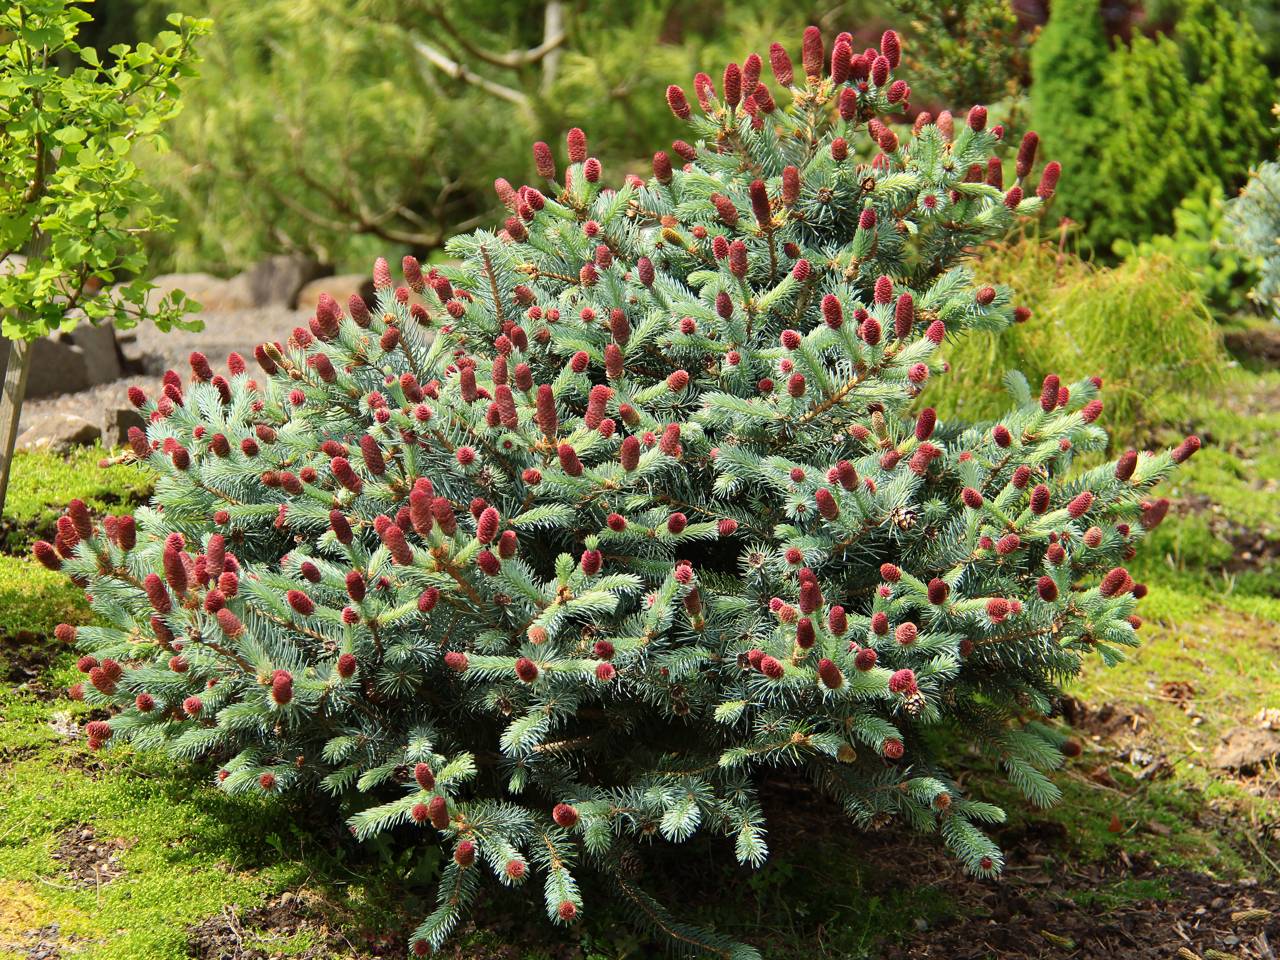 Picea pungens Ruby Teardrops Colorado Spruce conifer evergreen red cones